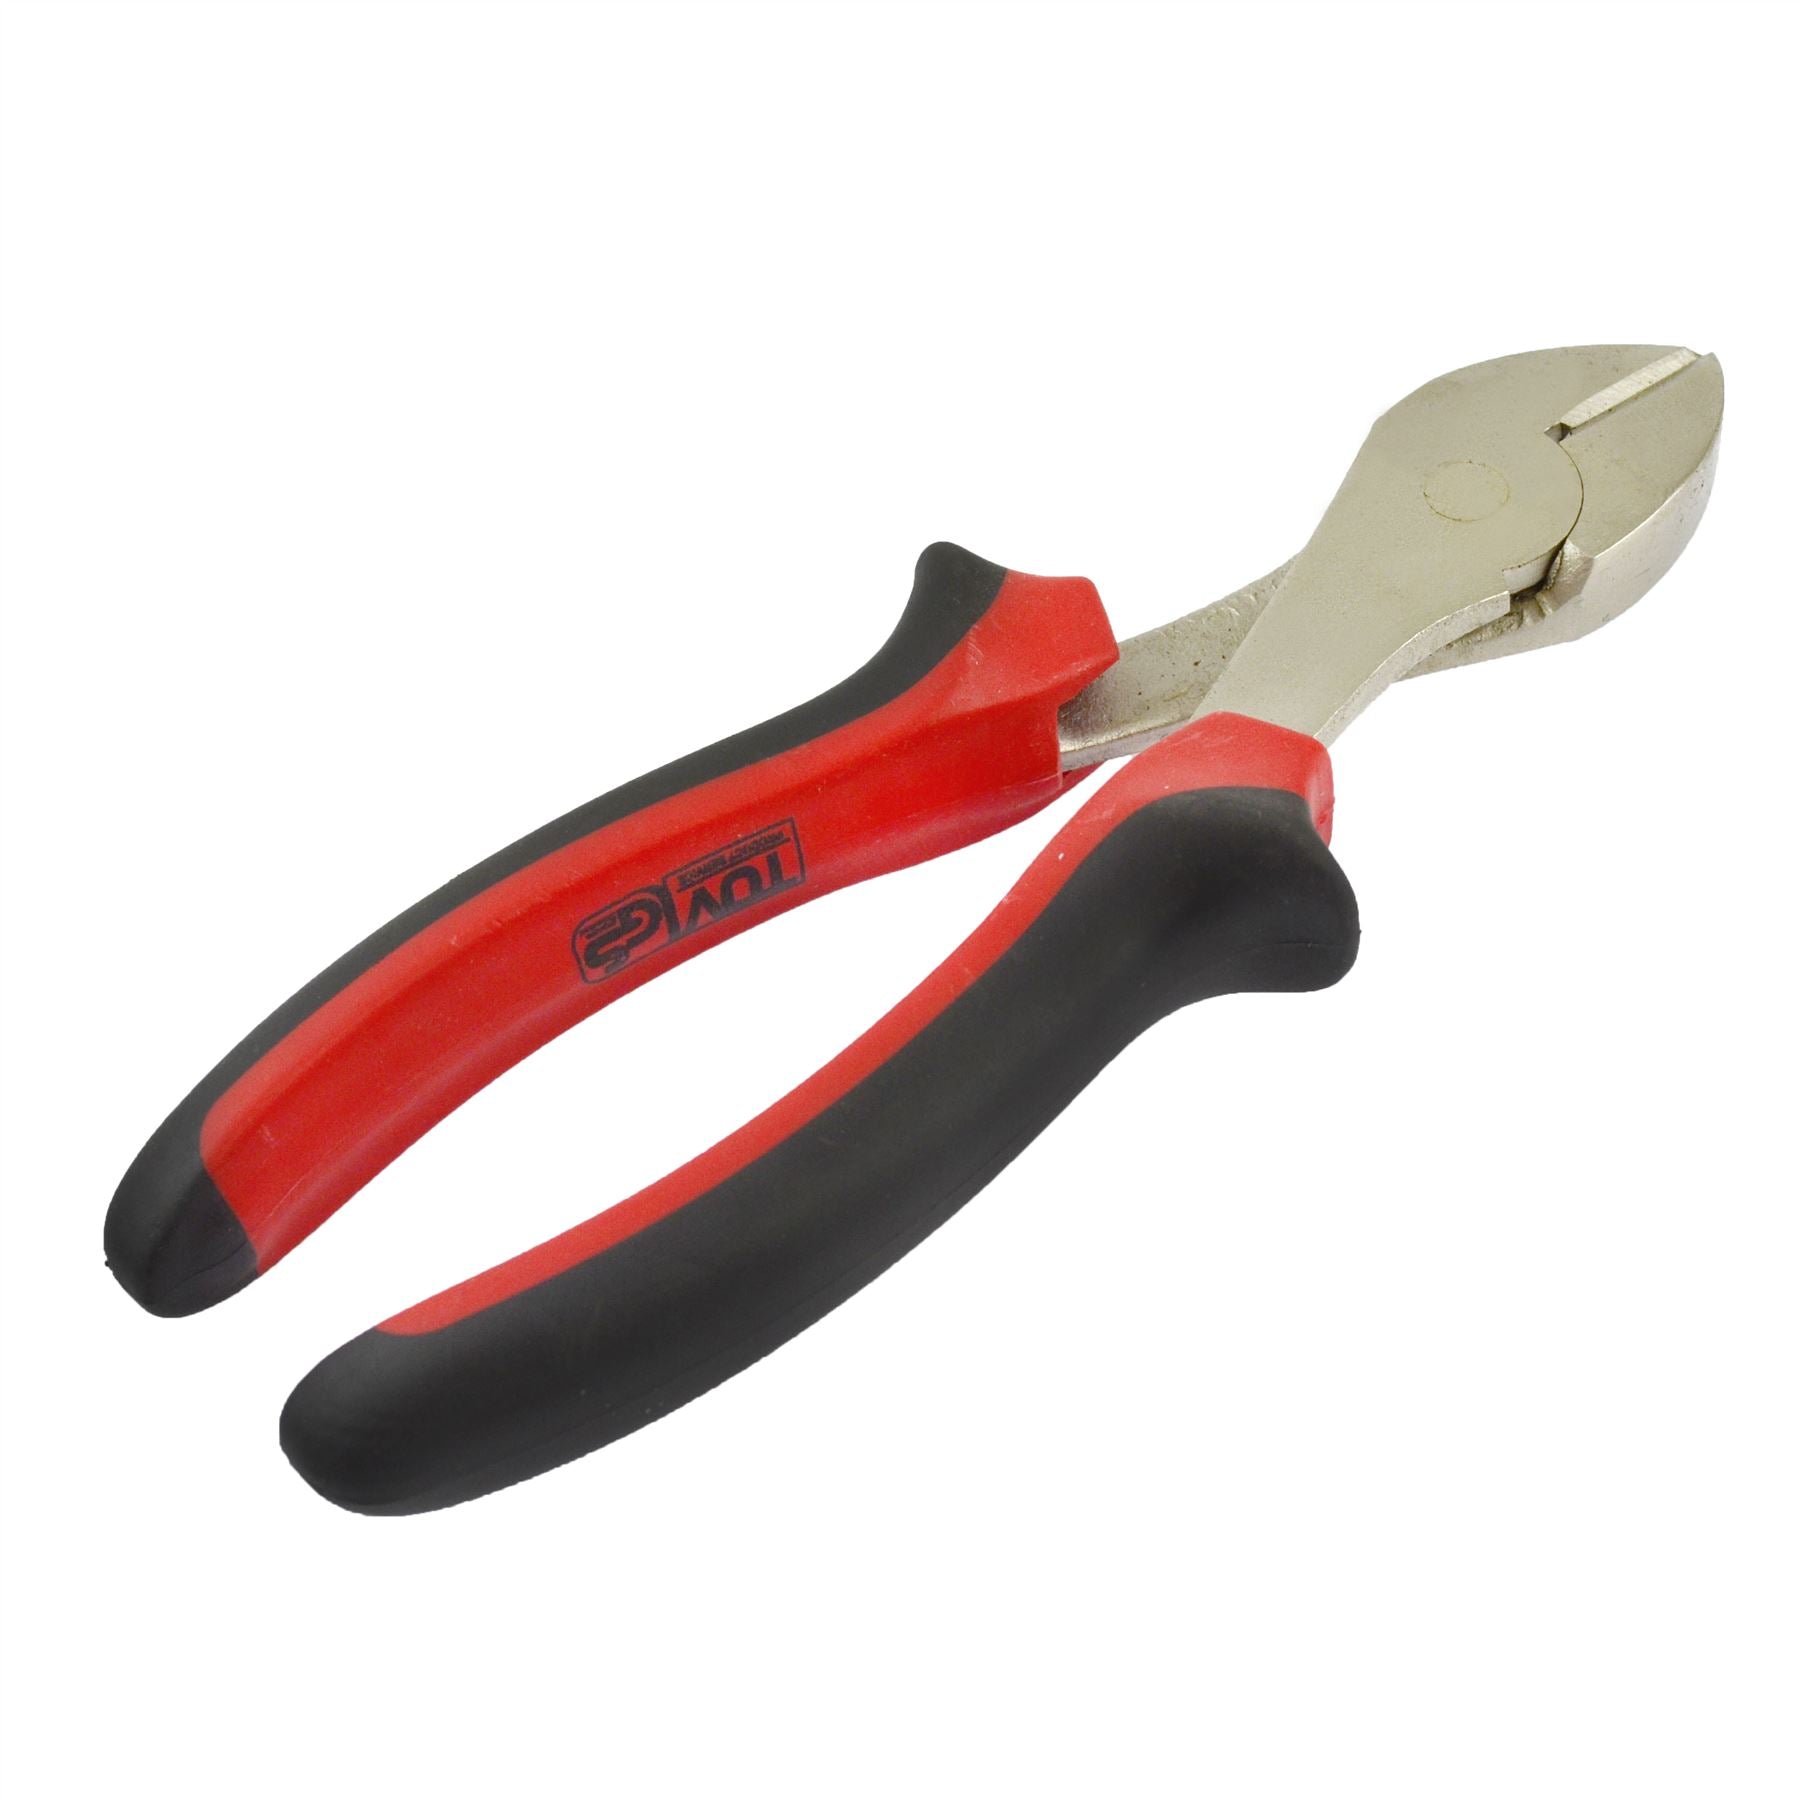 Diagonal Side Cutting Wire Cutters 7" (175mm) Pliers Snips TE643